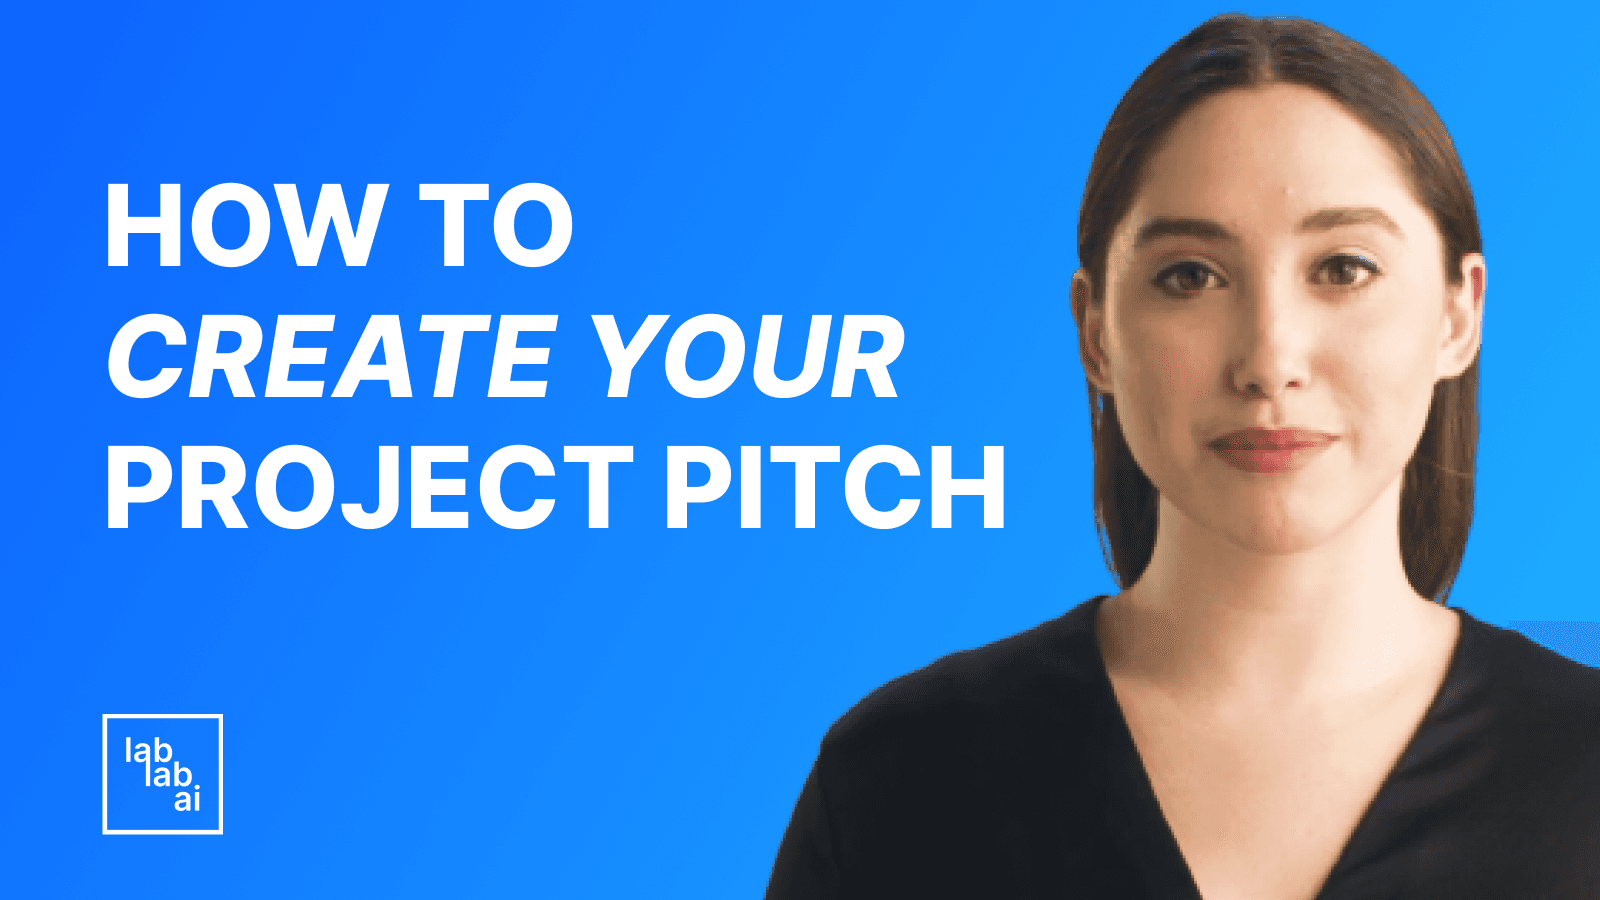 Guidelines for Creating a Project Pitch Thumbnail Image